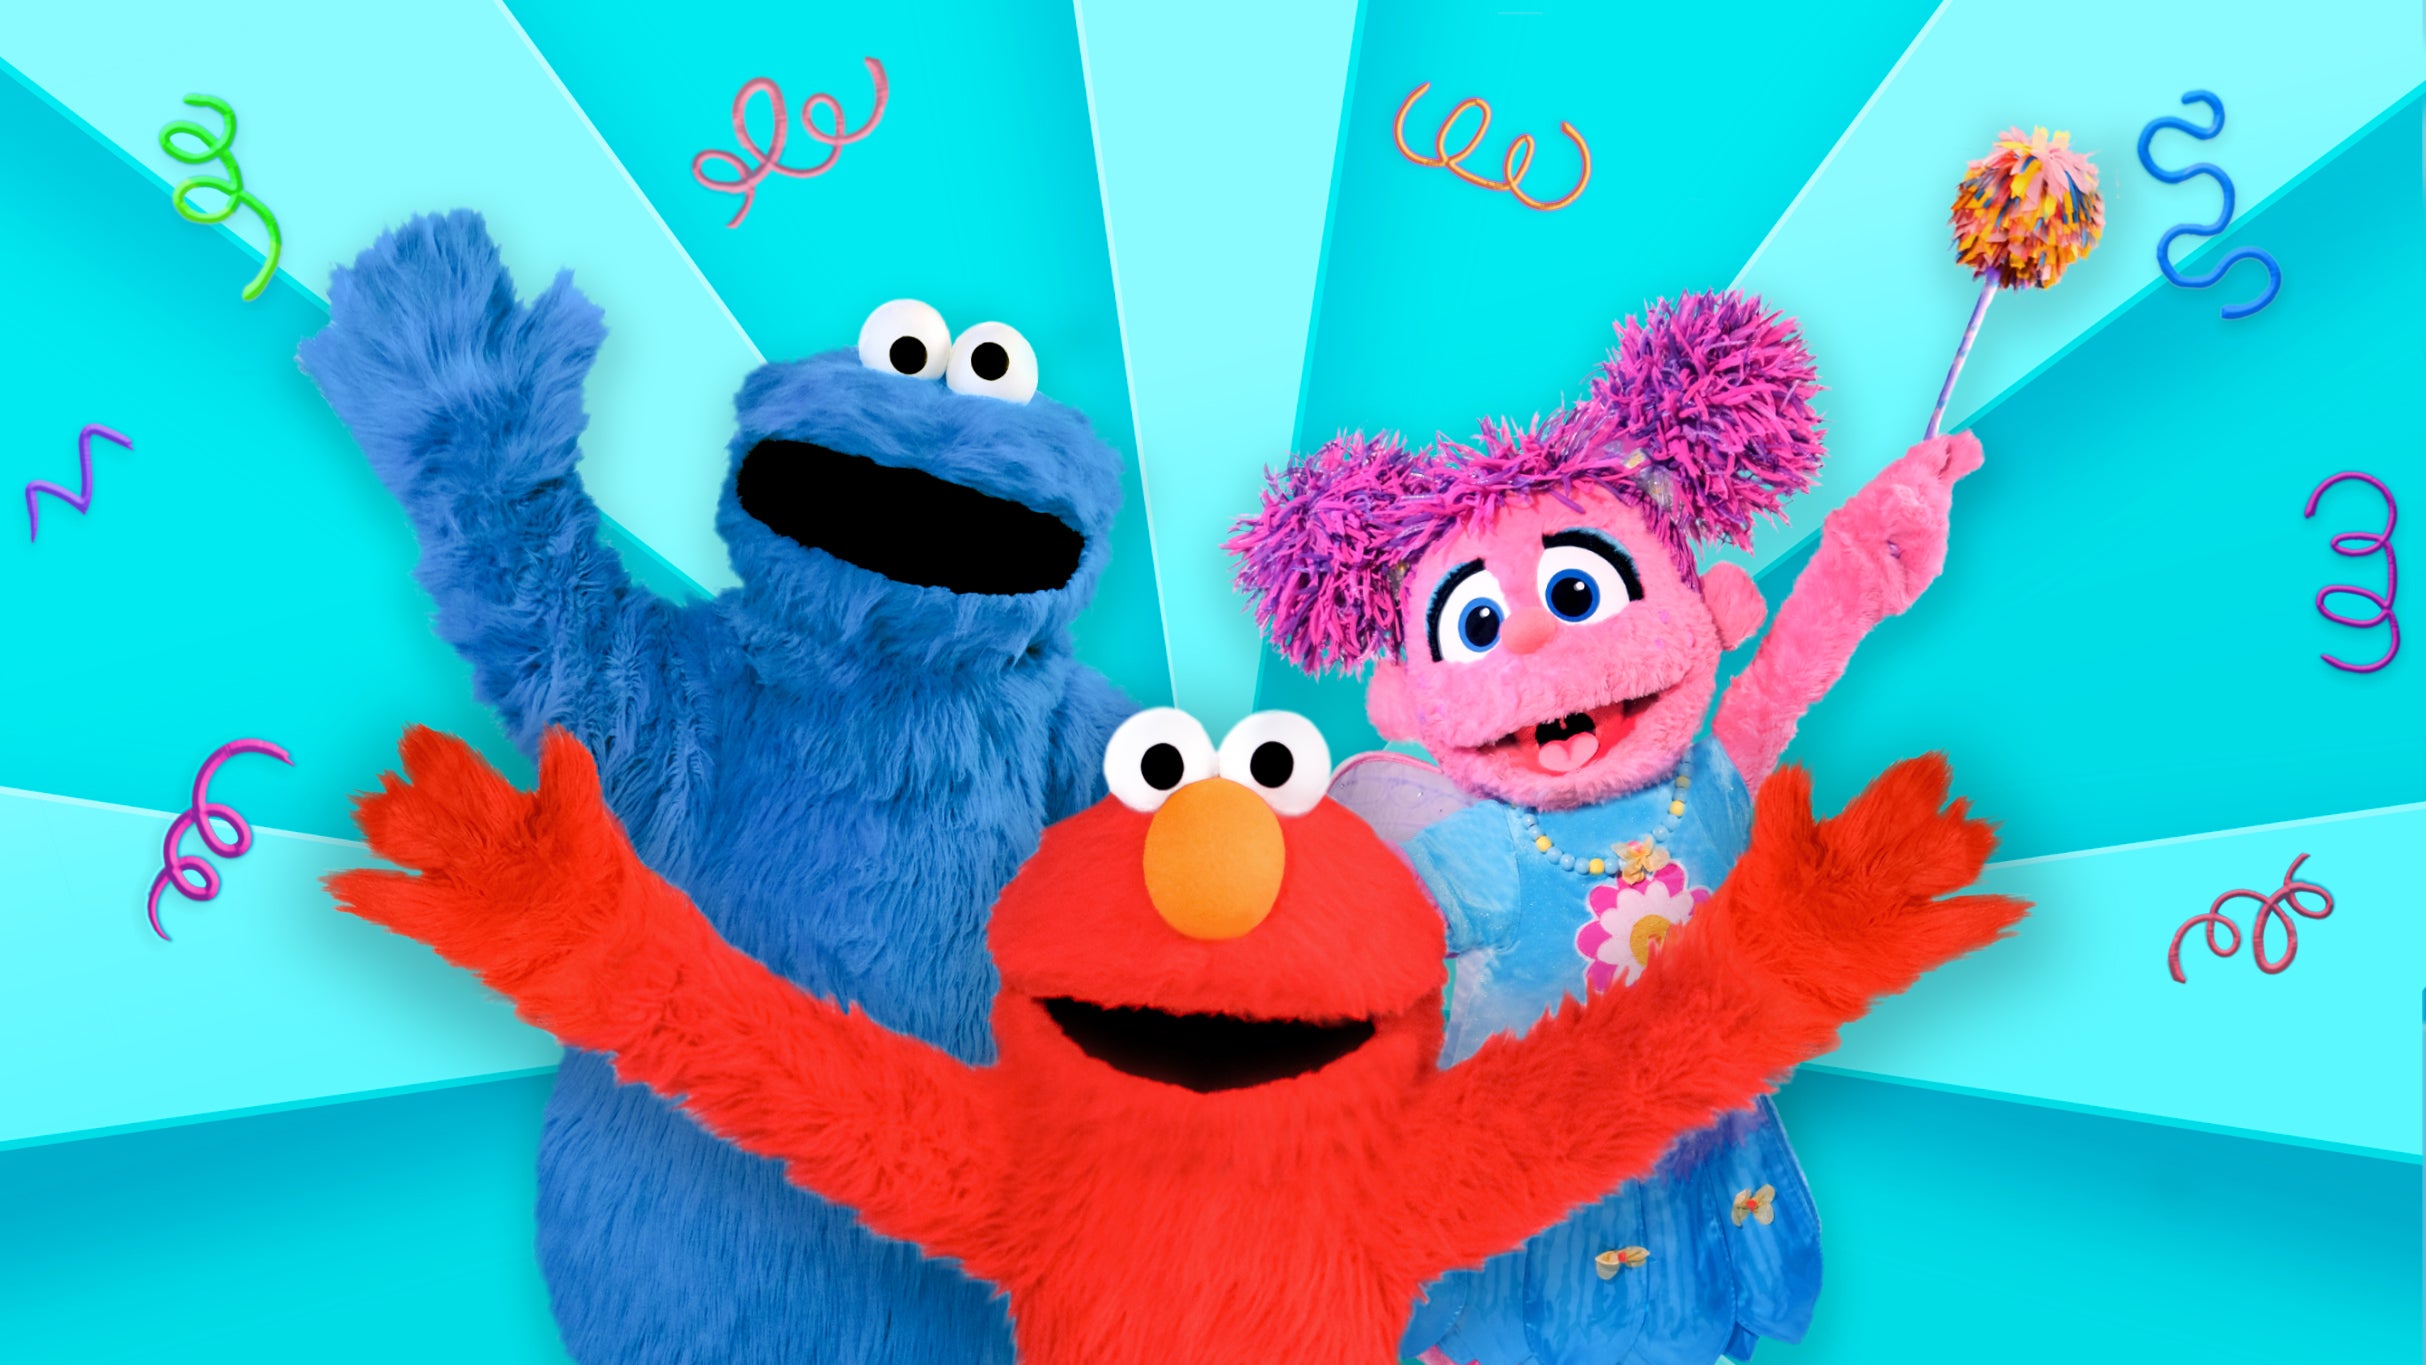 Sesame Street Live! Say Hello free presale password for early tickets in Rochester